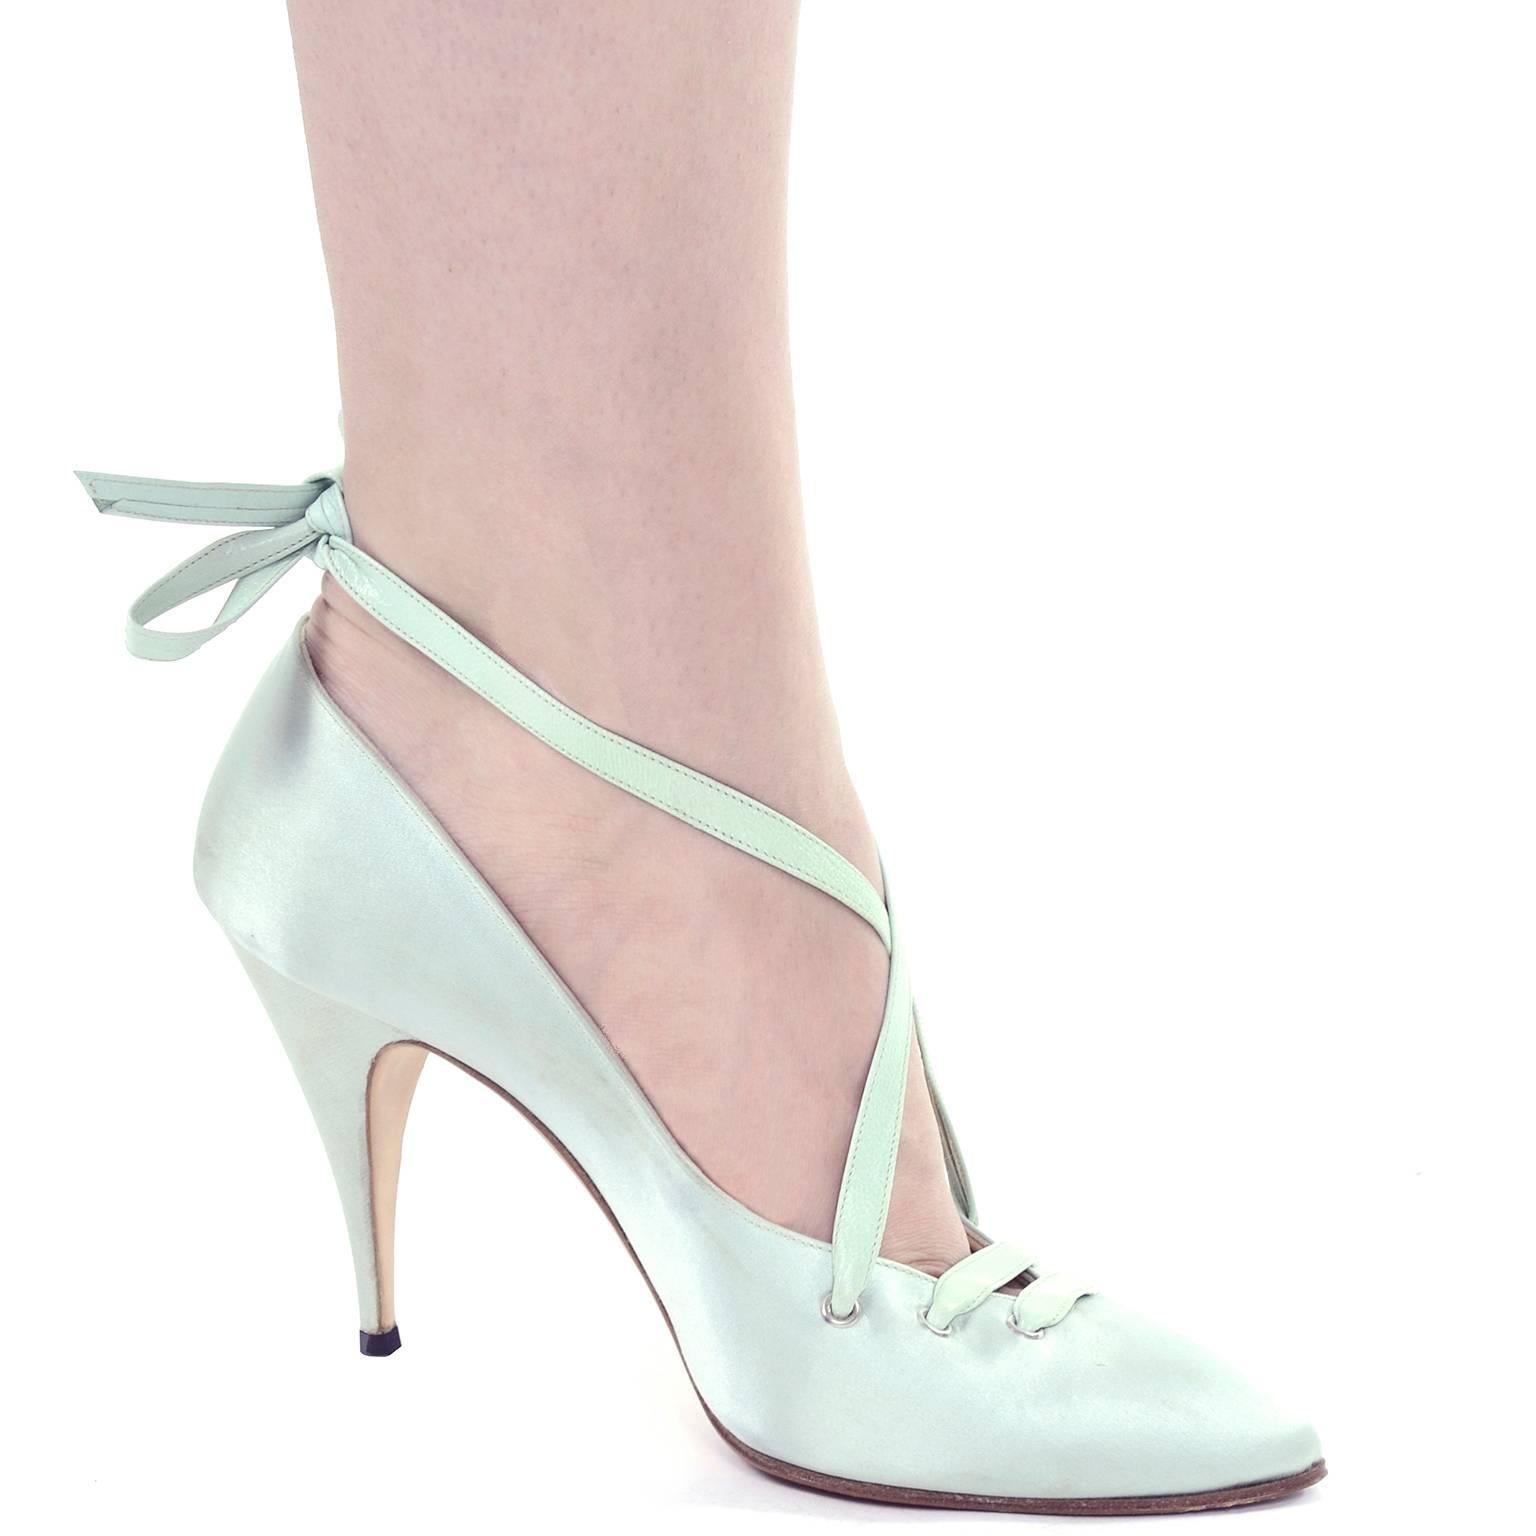 green satin shoes